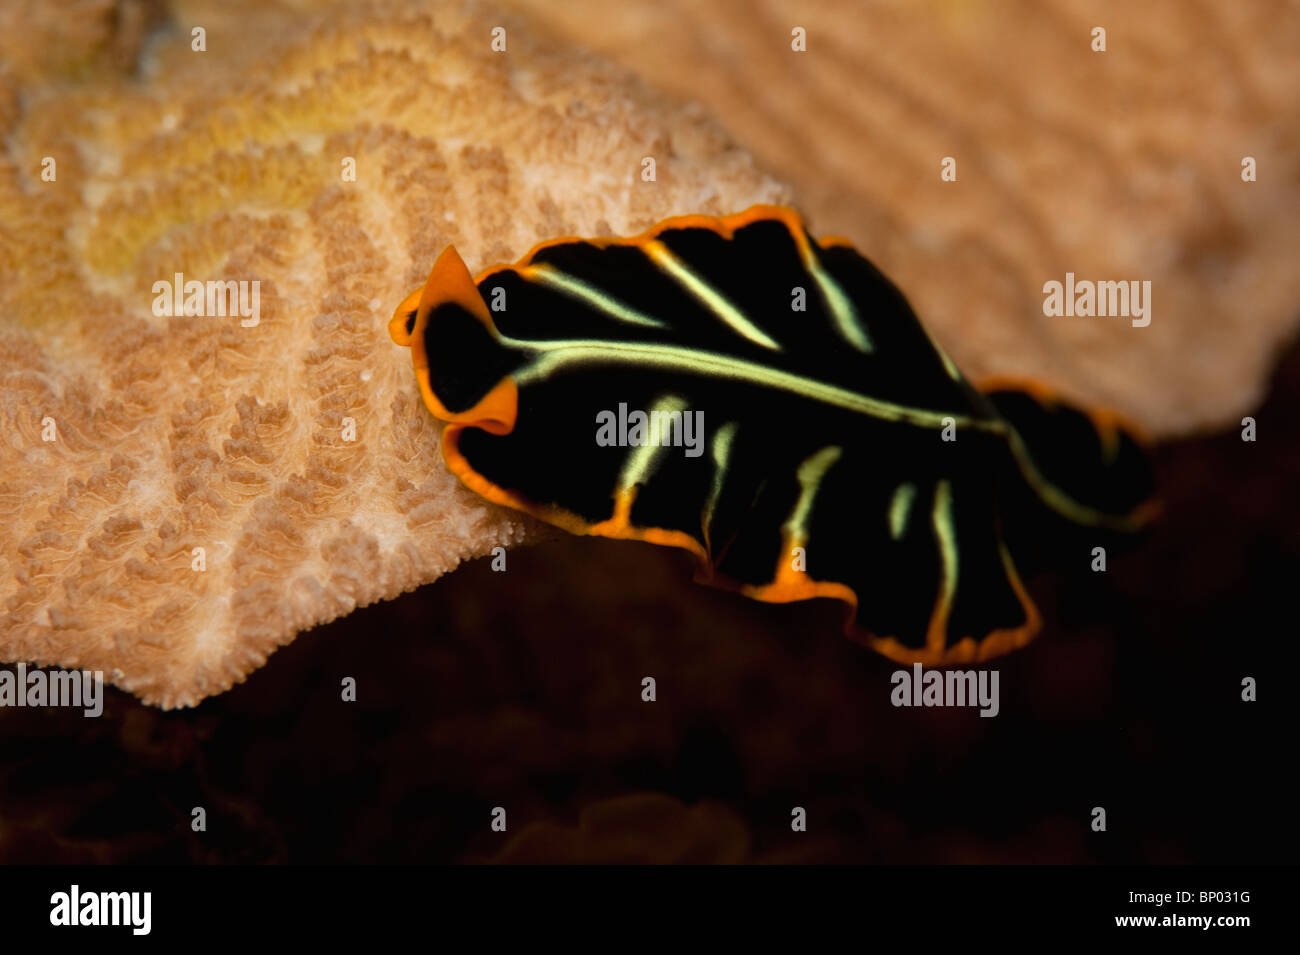 A Polyclad flatworm crawling over coral on a reef in Indonesia. Stock Photo